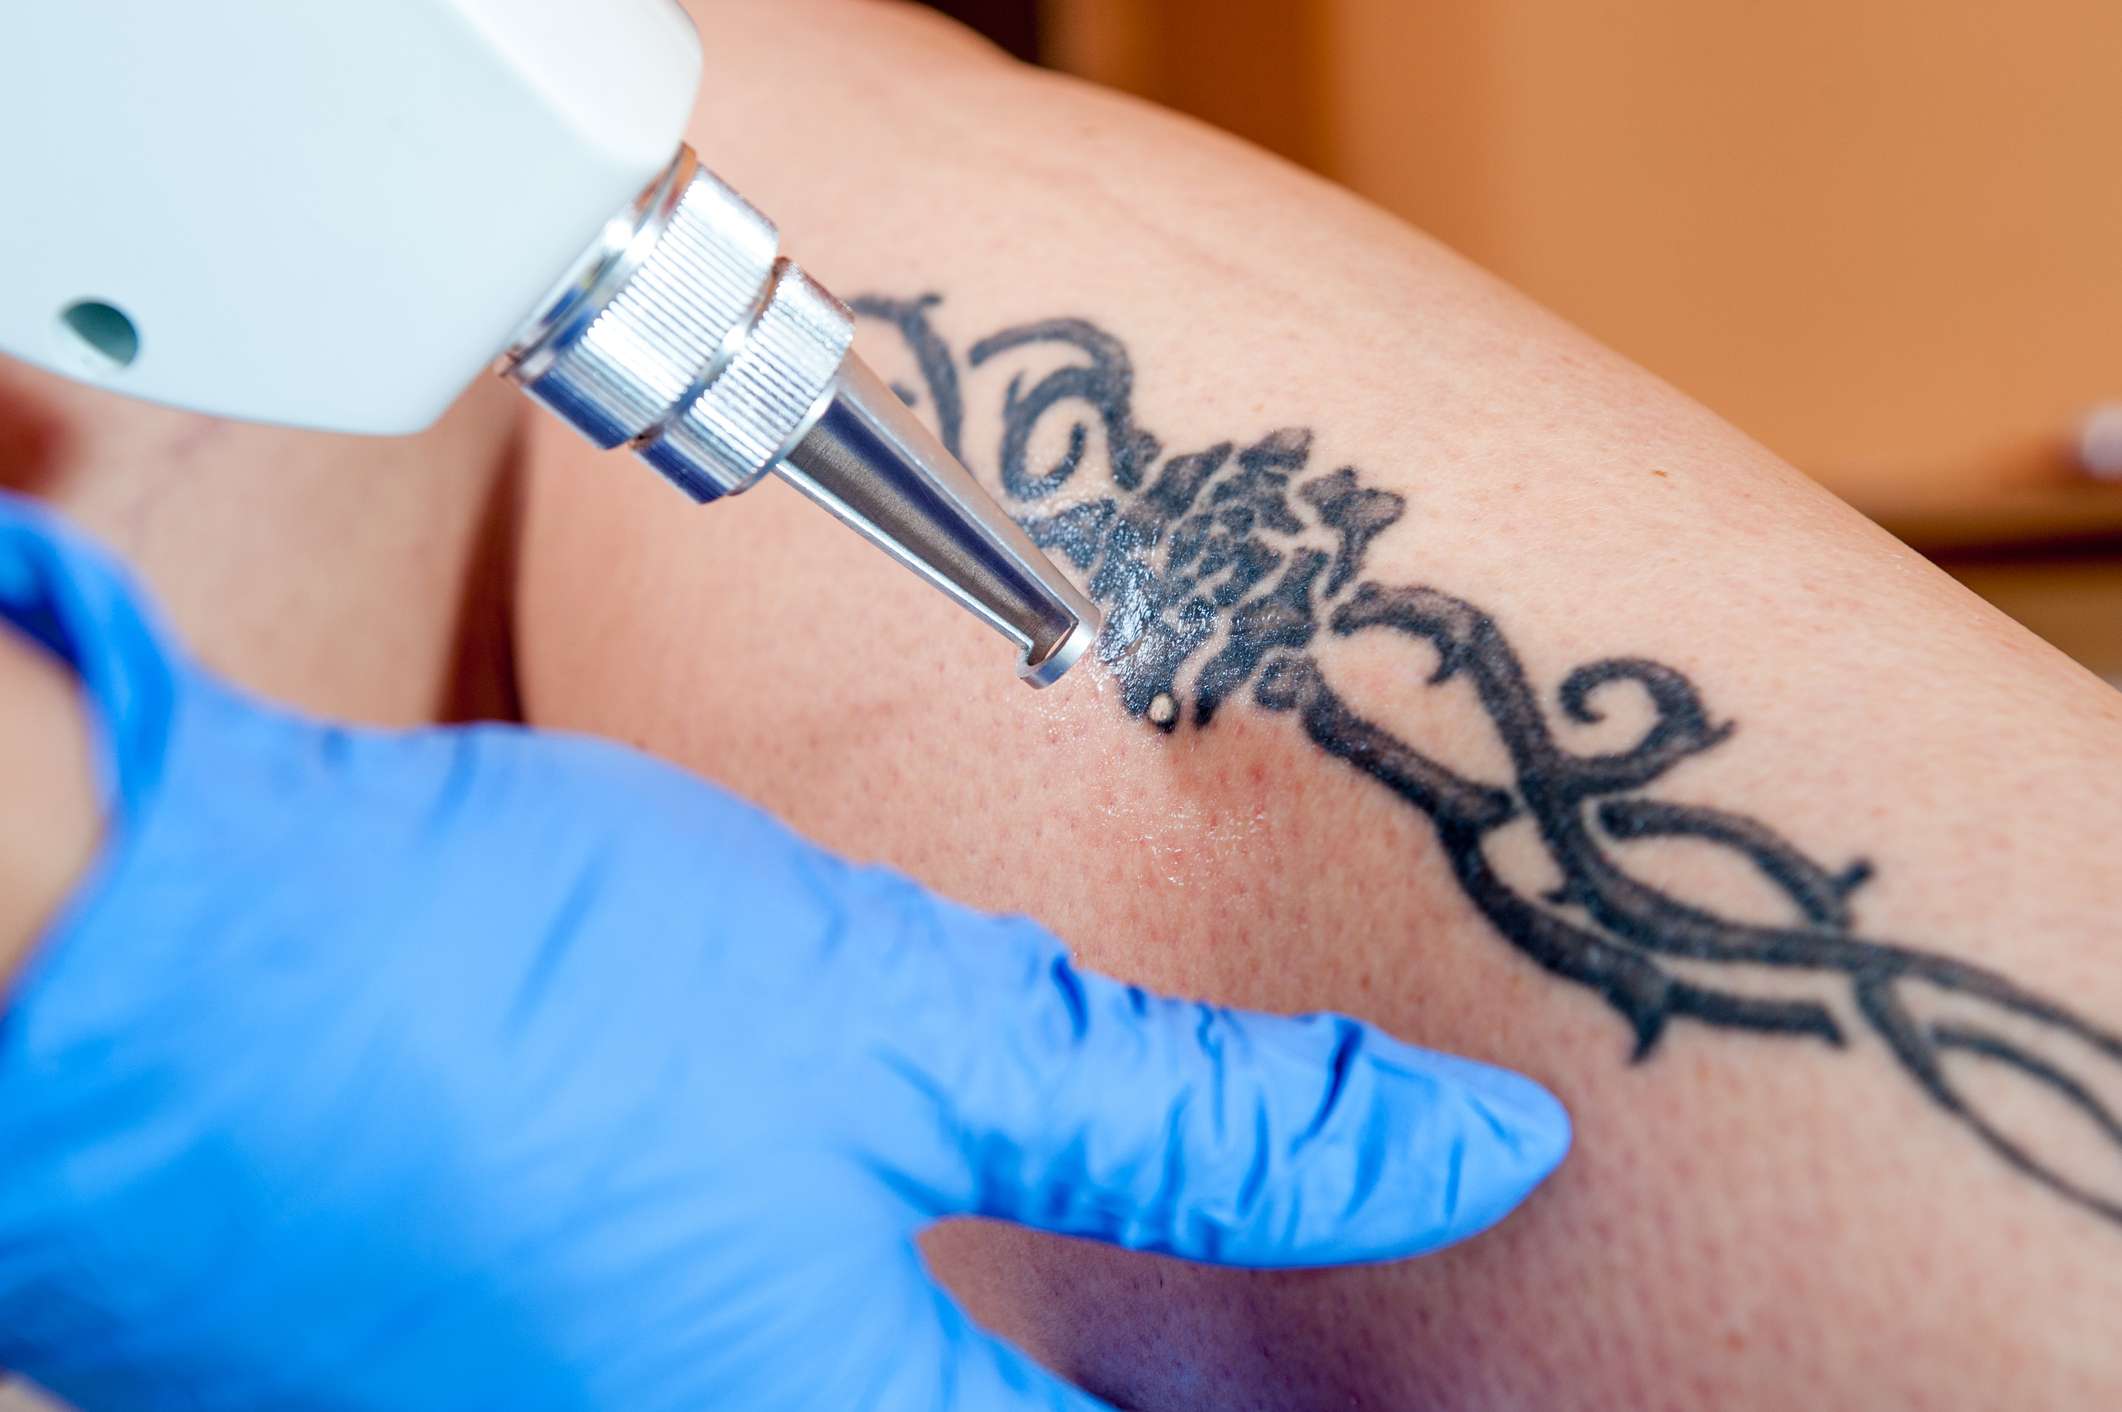 When is it Time to Remove Your Tattoo?